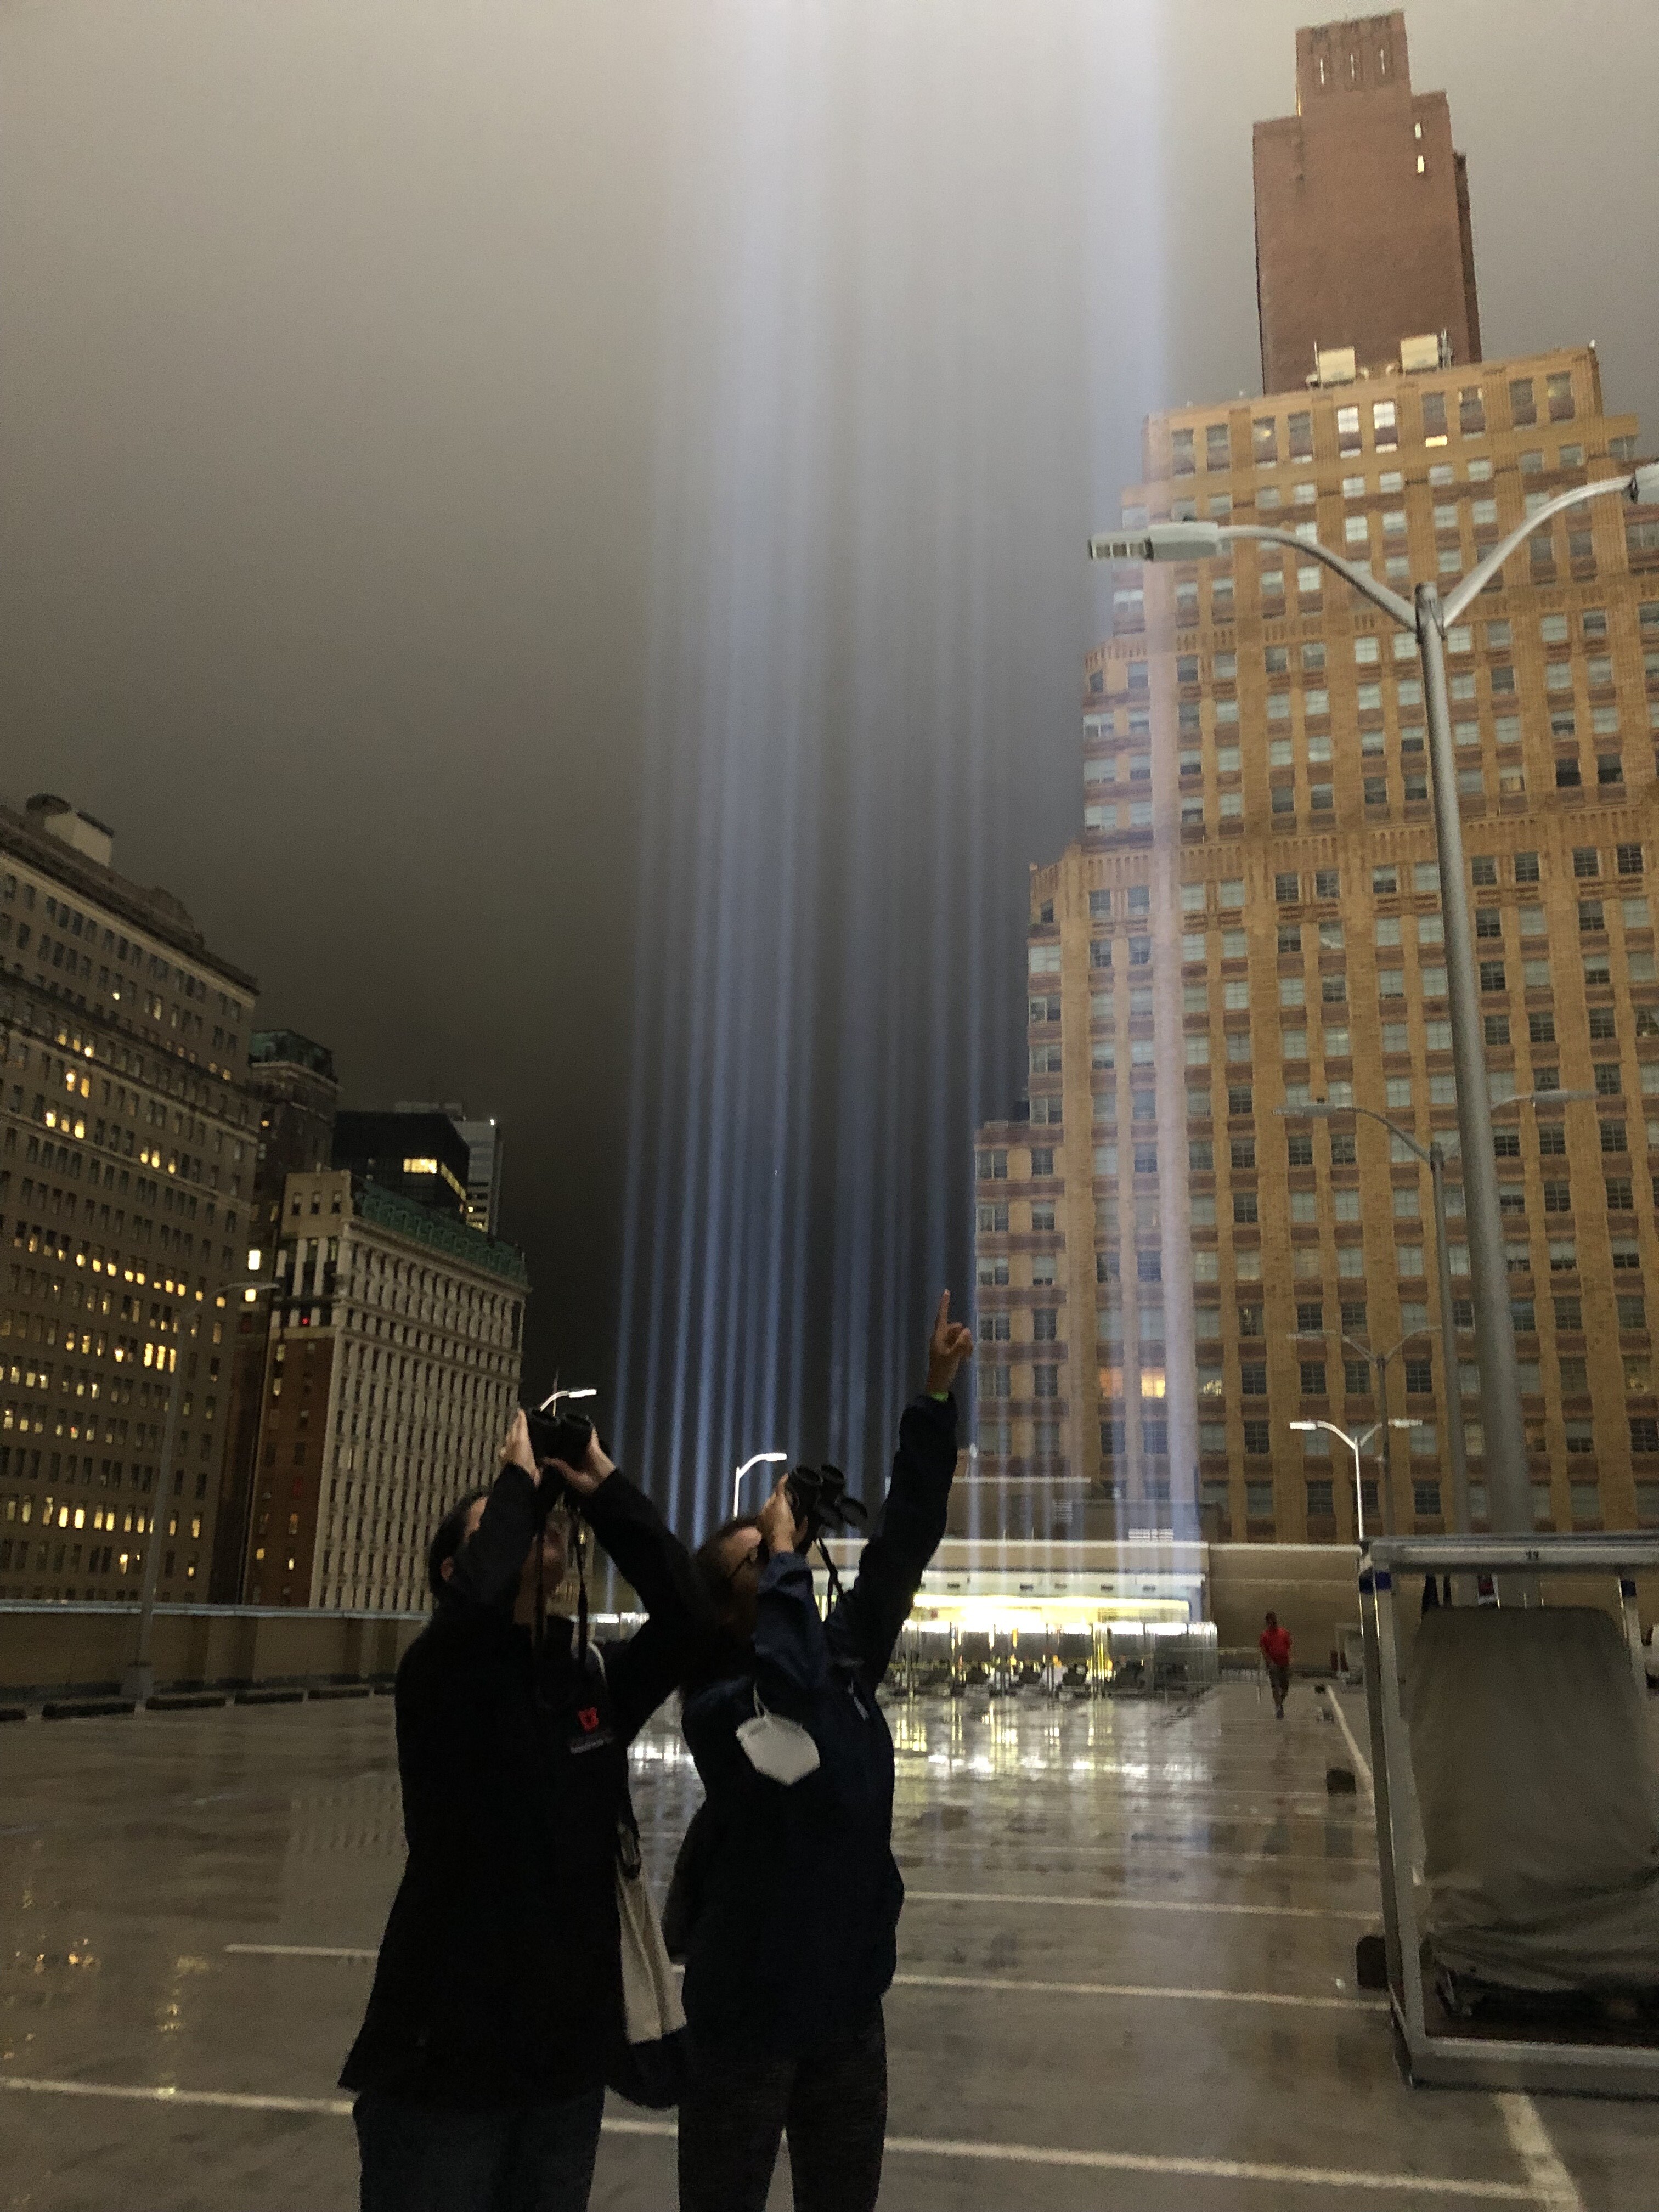 Community Science Manager Katherine Chen and Public Programs Manager Roslyn Rivas monitor the Tribute in Light for birds caught in the lights. Photo: NYC Bird Alliance